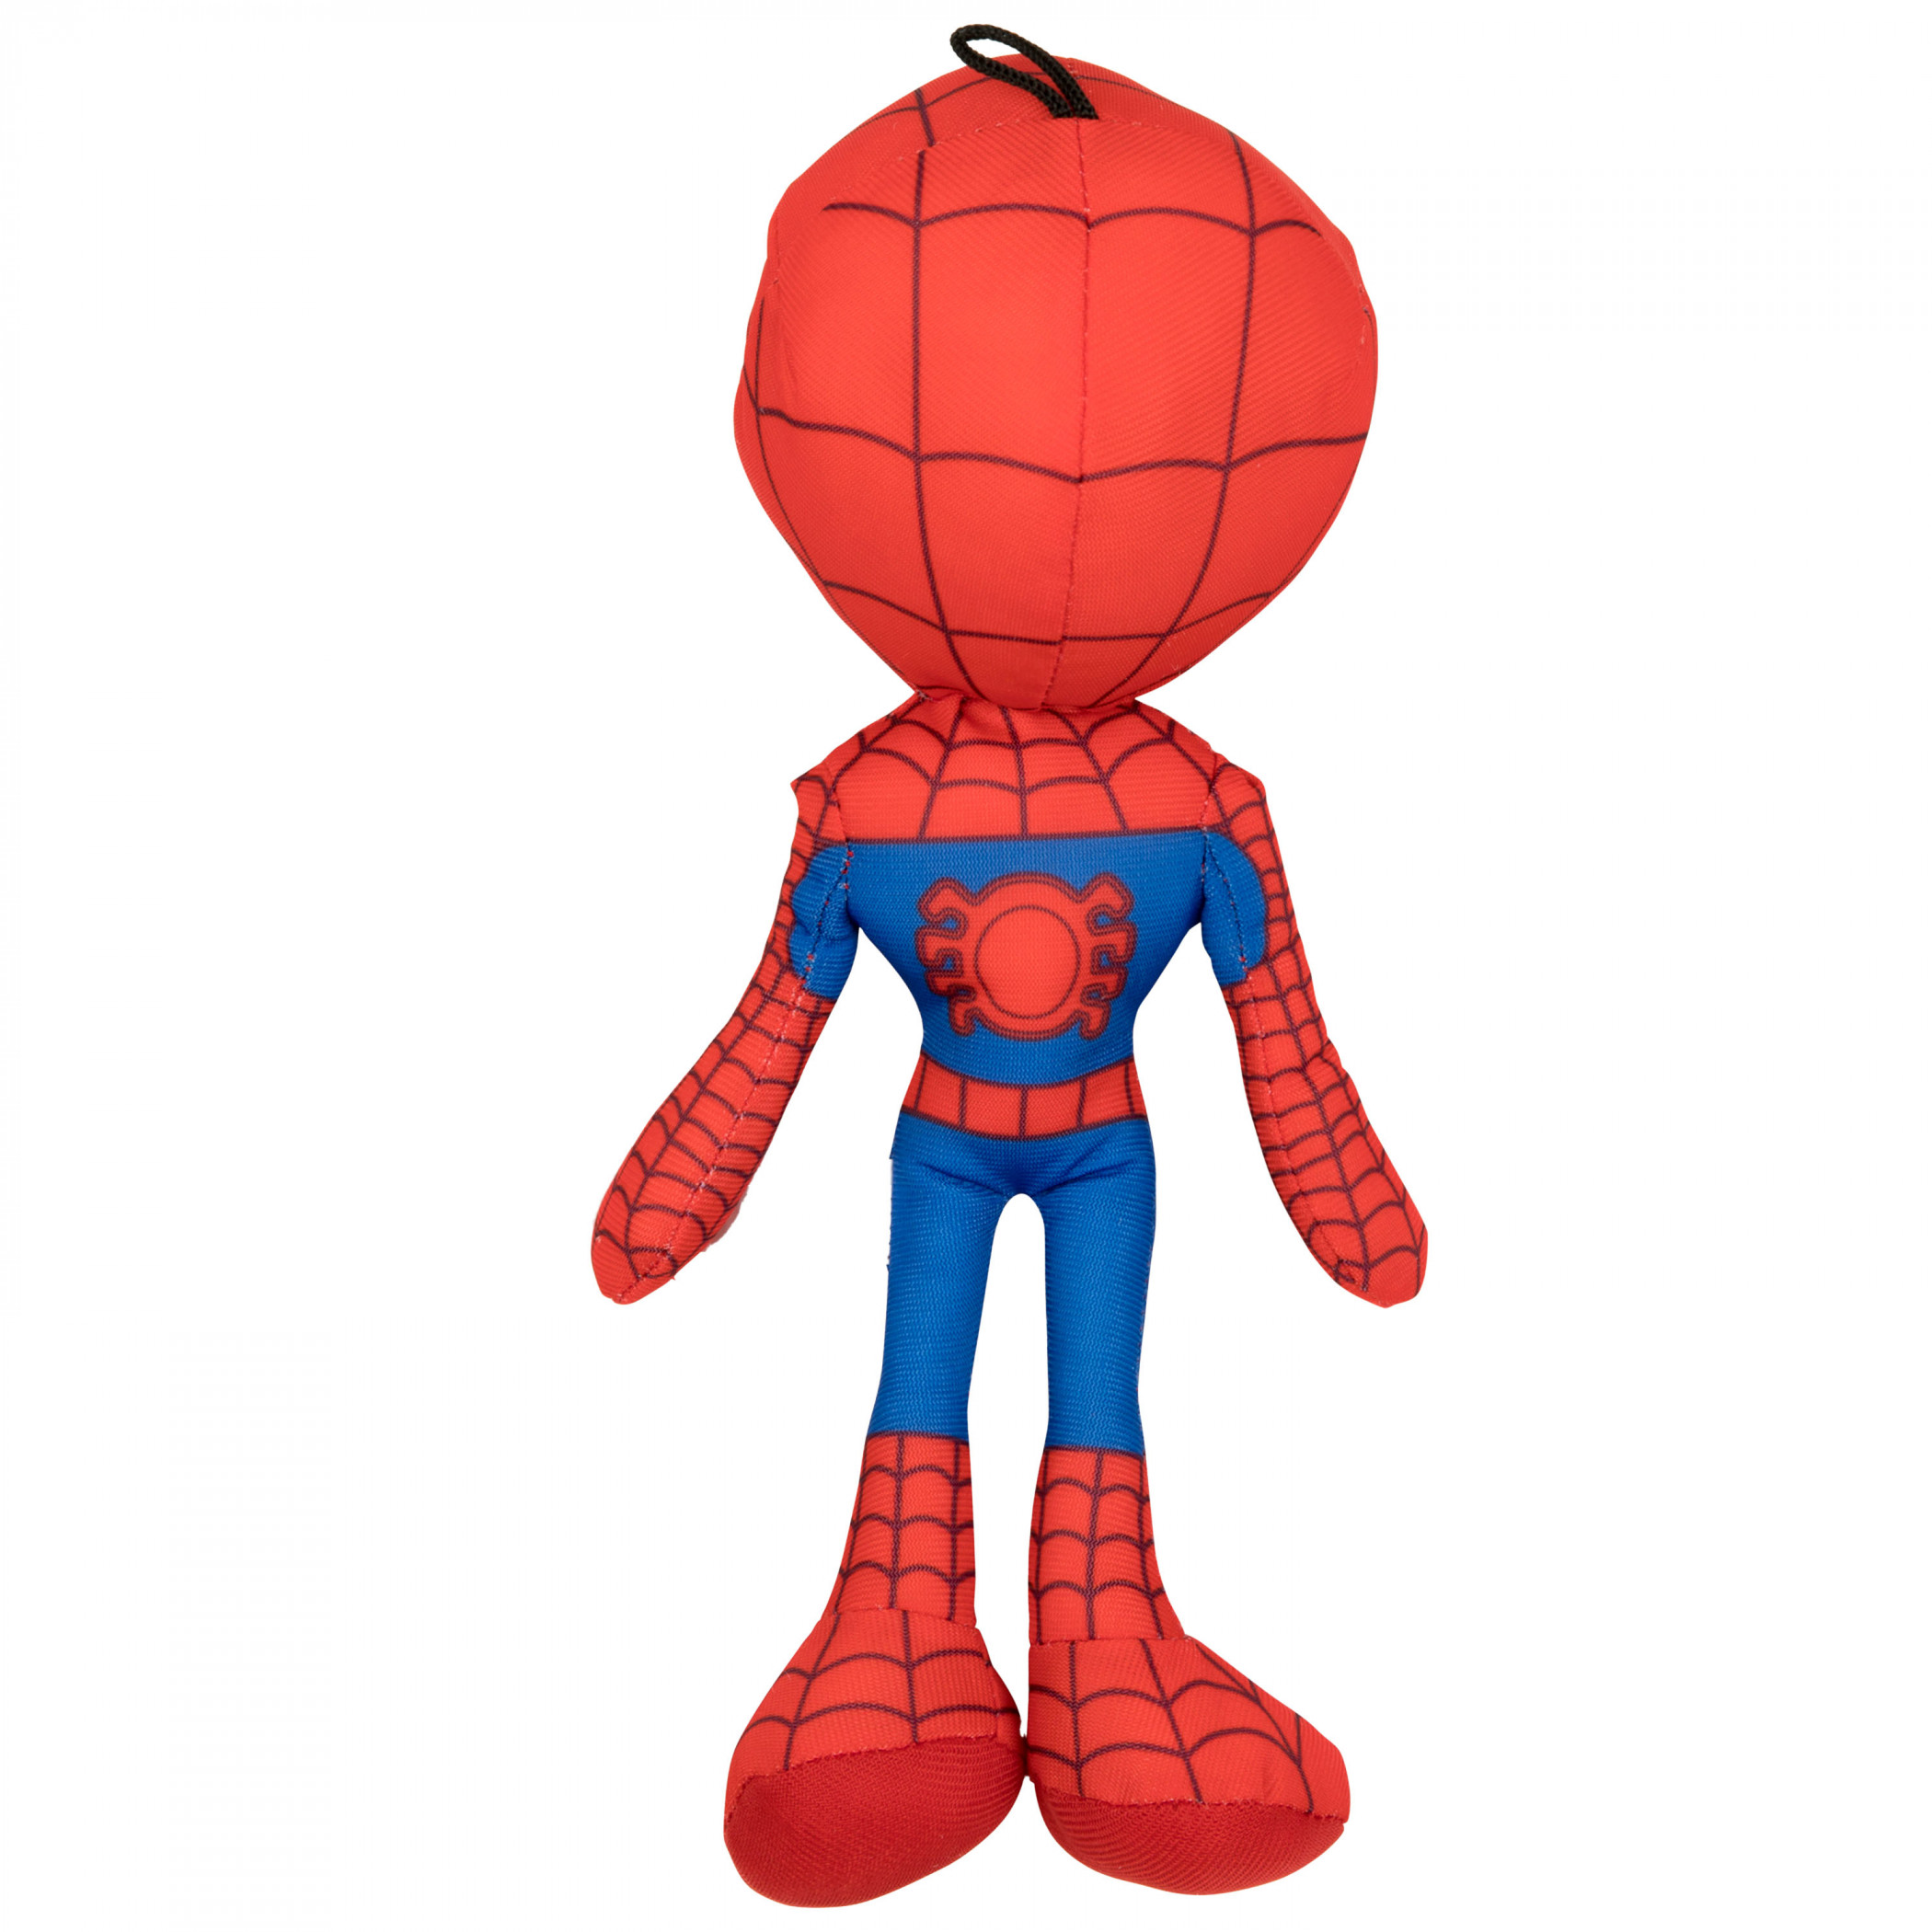 Spider-Man and His Amazing Friends 9" Plush Doll